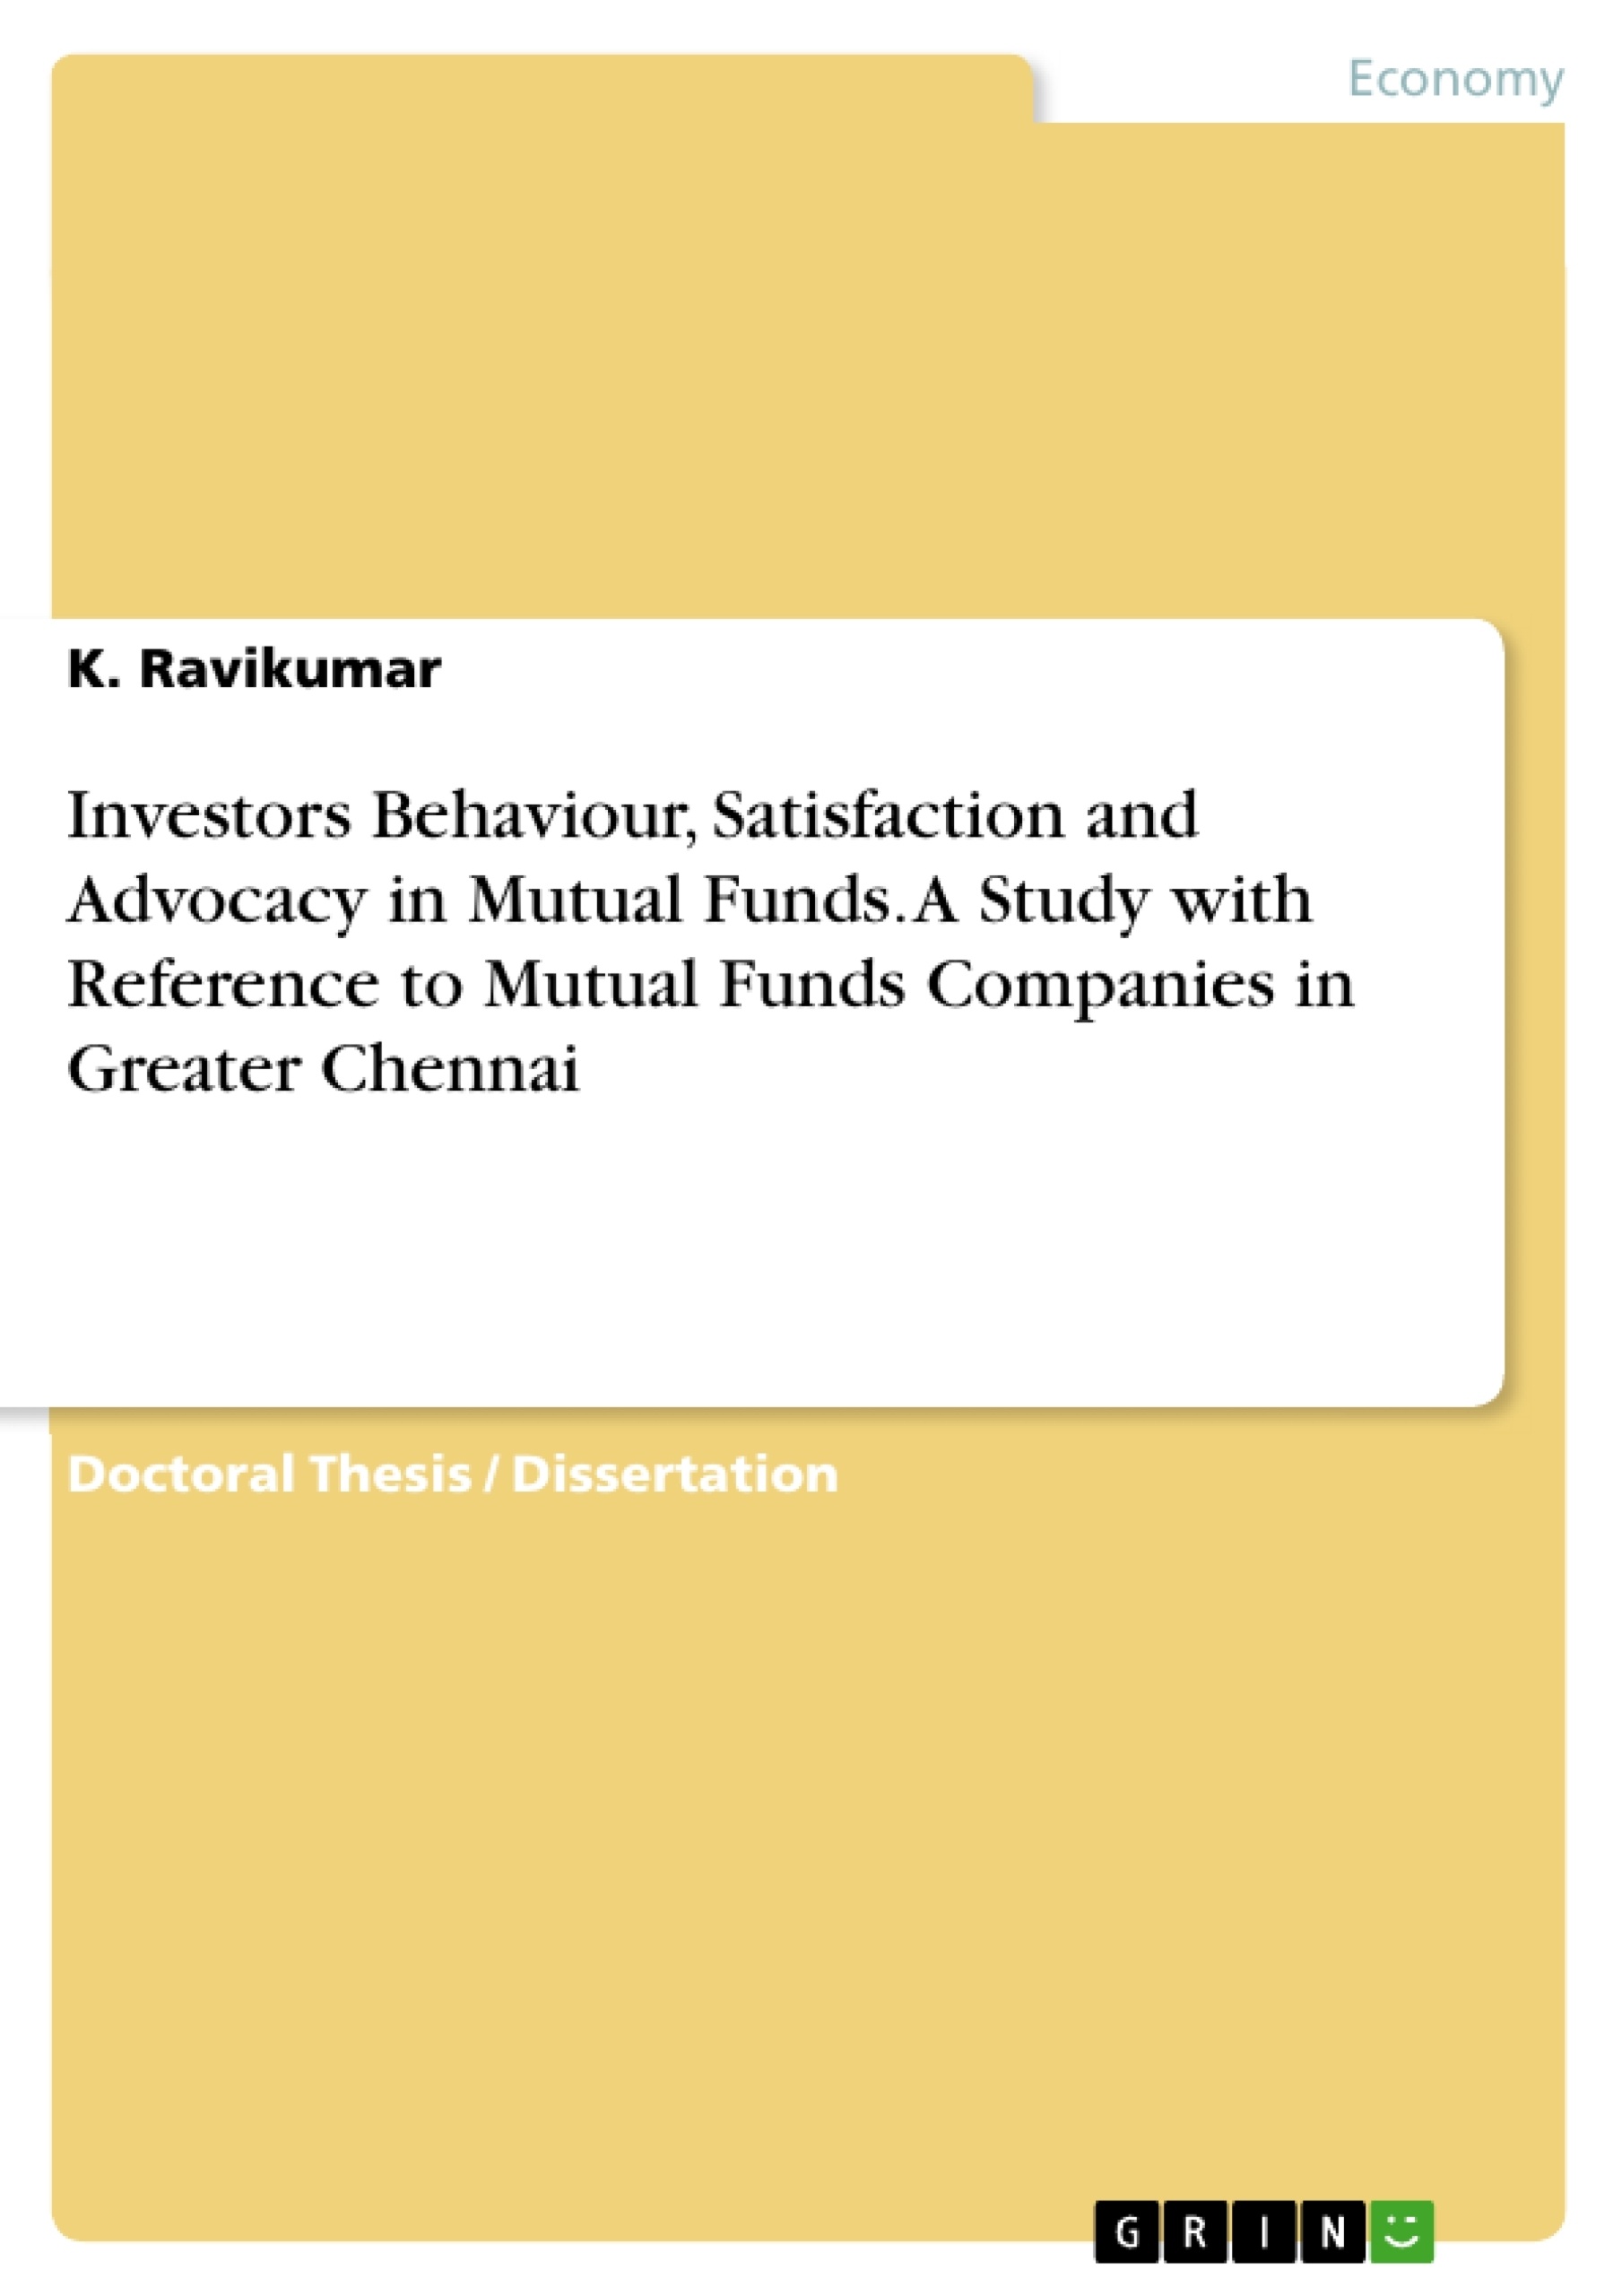 Title: Investors Behaviour, Satisfaction and Advocacy  in Mutual Funds. A Study with Reference to Mutual Funds Companies in Greater Chennai